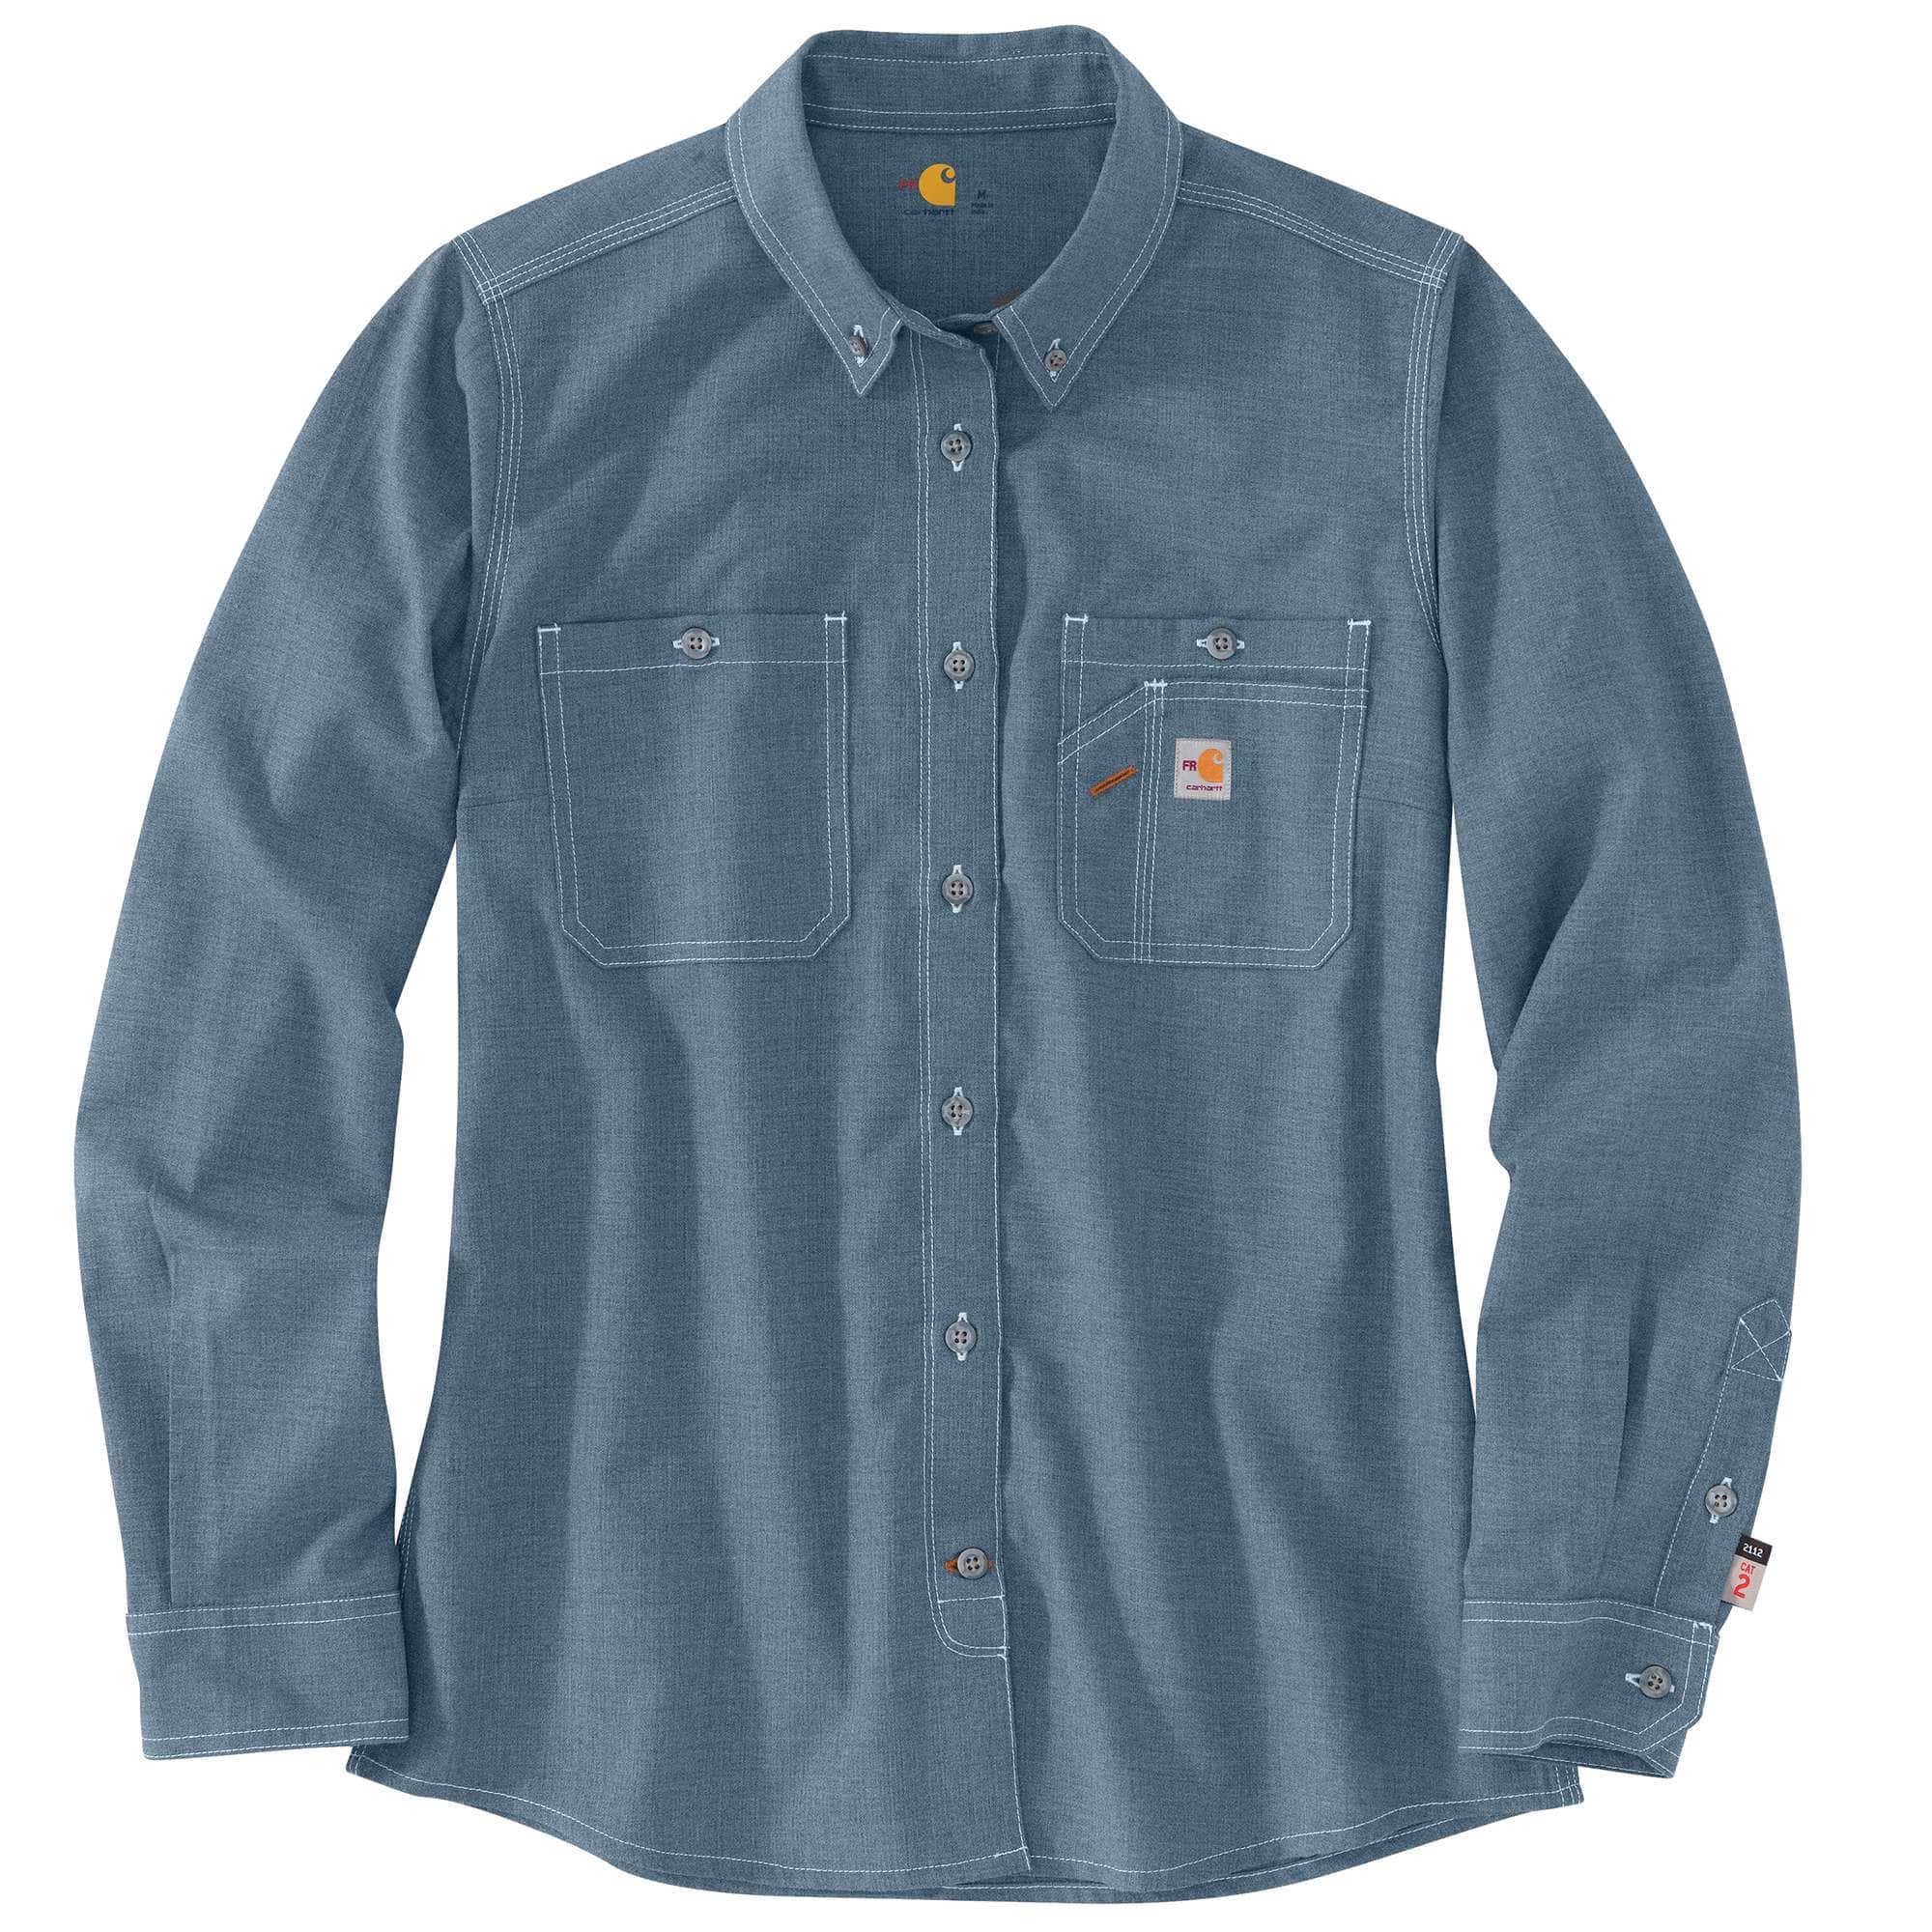 Carhartt / Women's Flame-Resistant Force Fitted Medium Weight